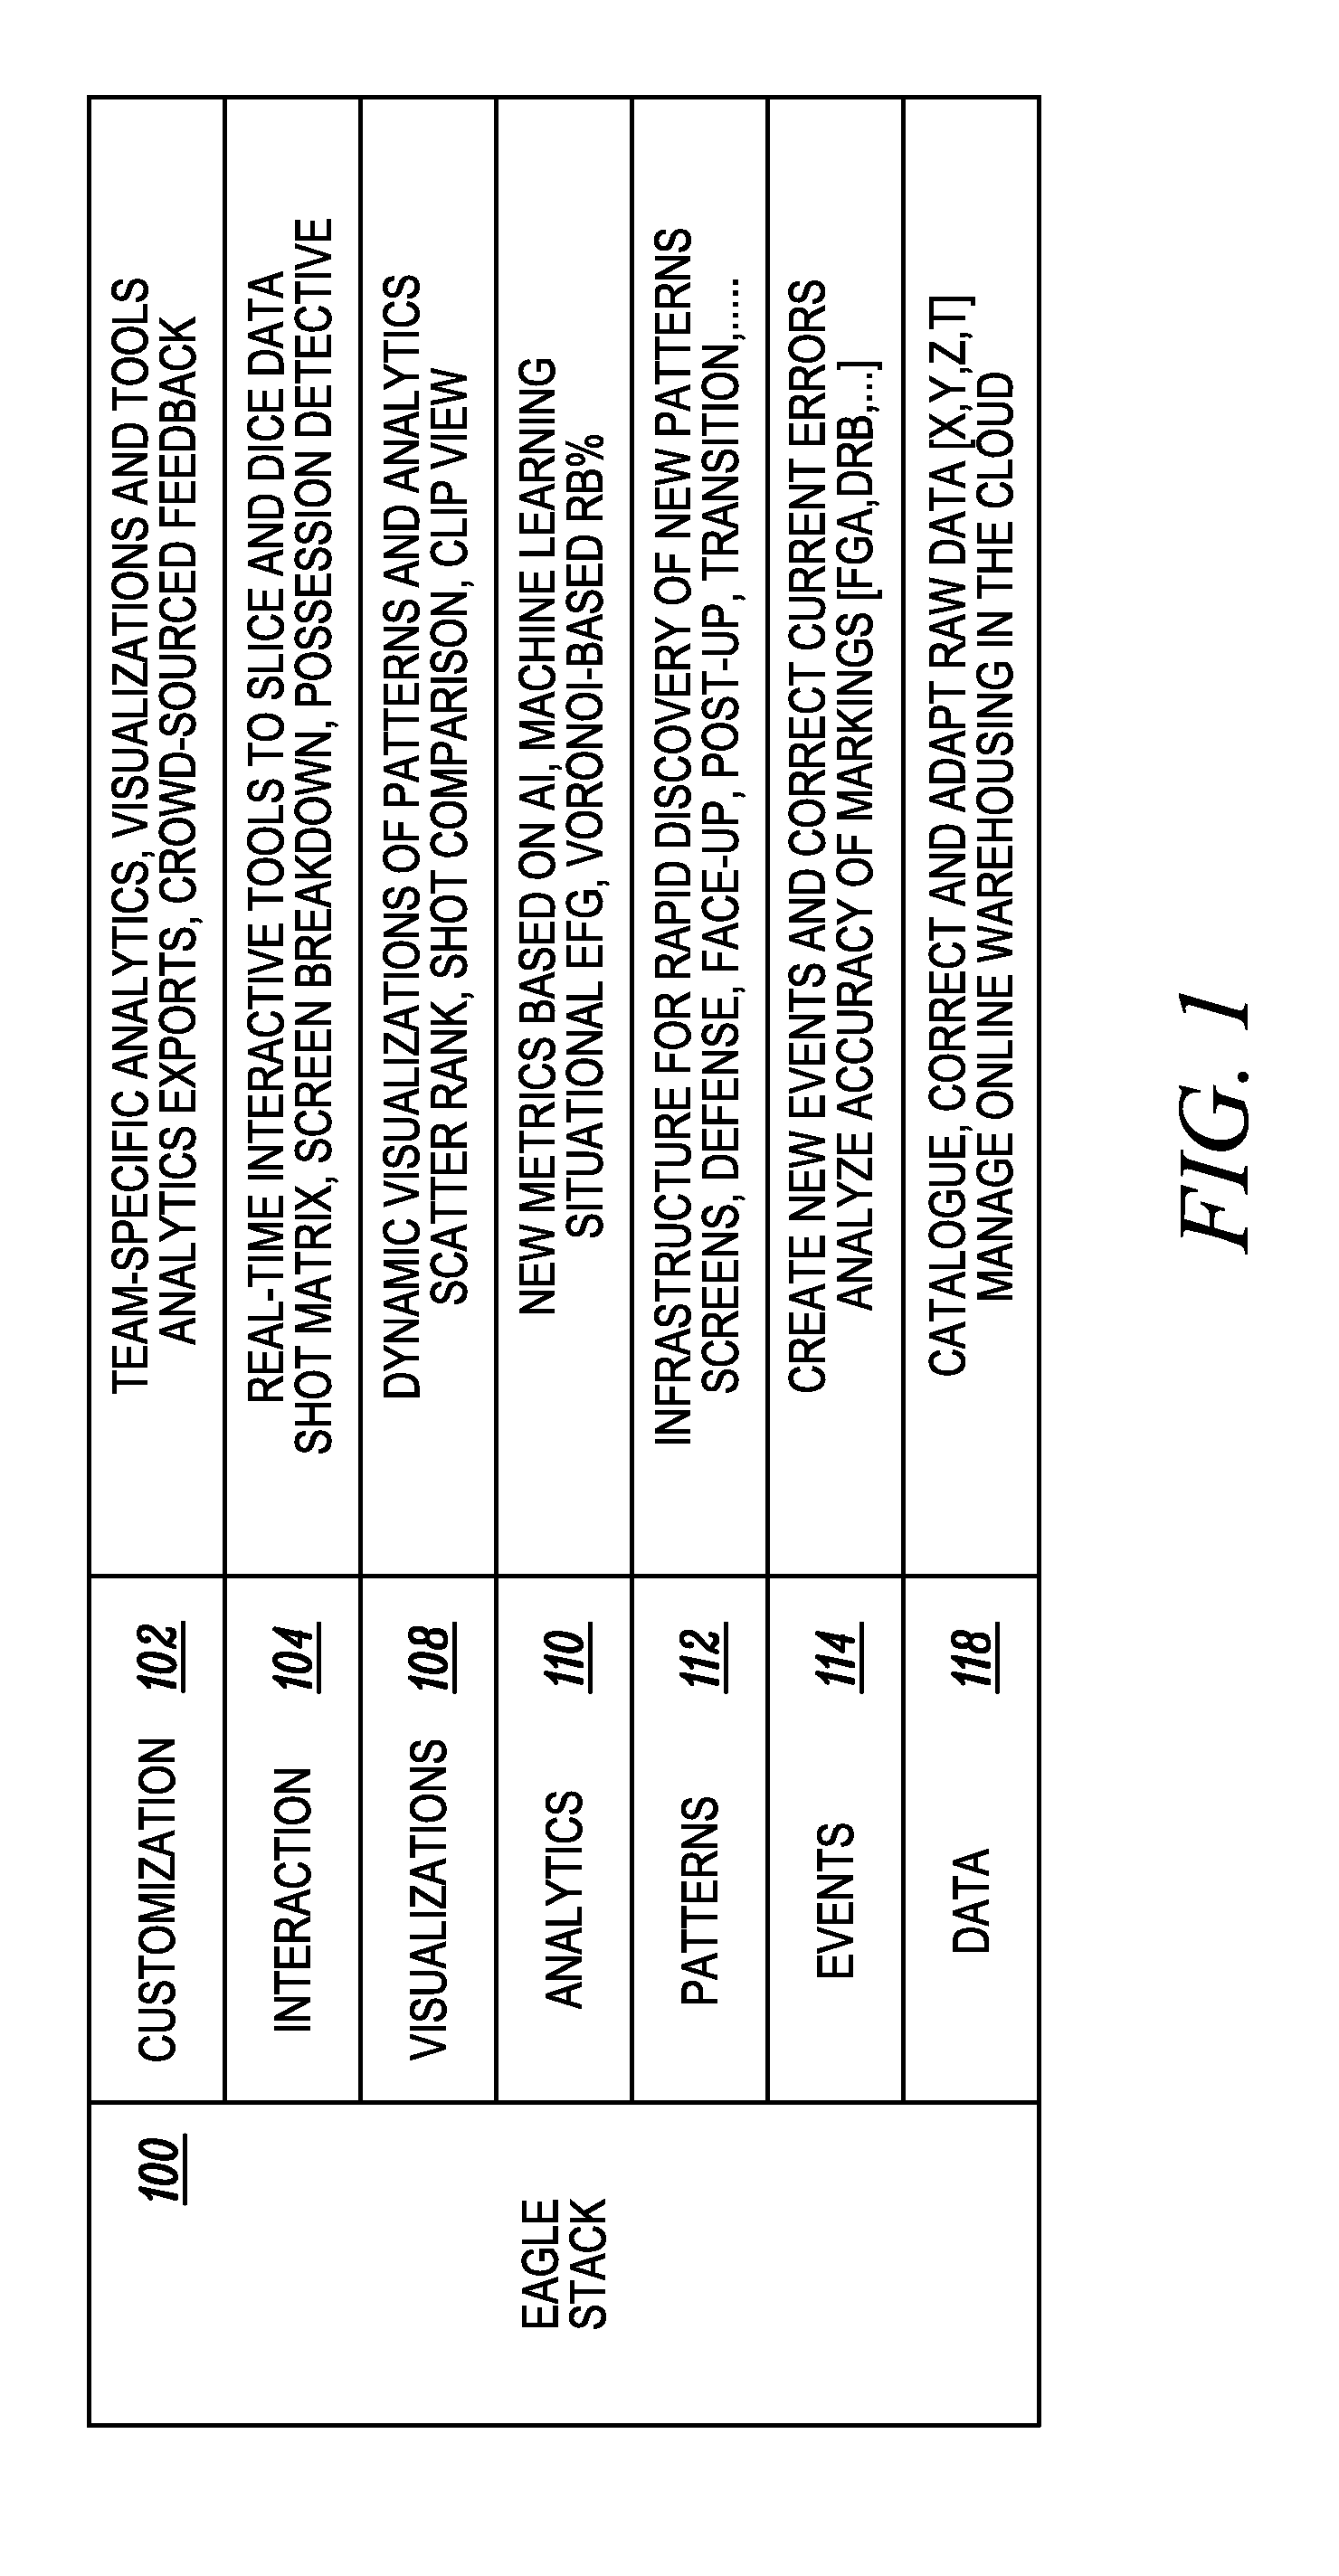 System and method for performing spatio-temporal analysis of sporting events